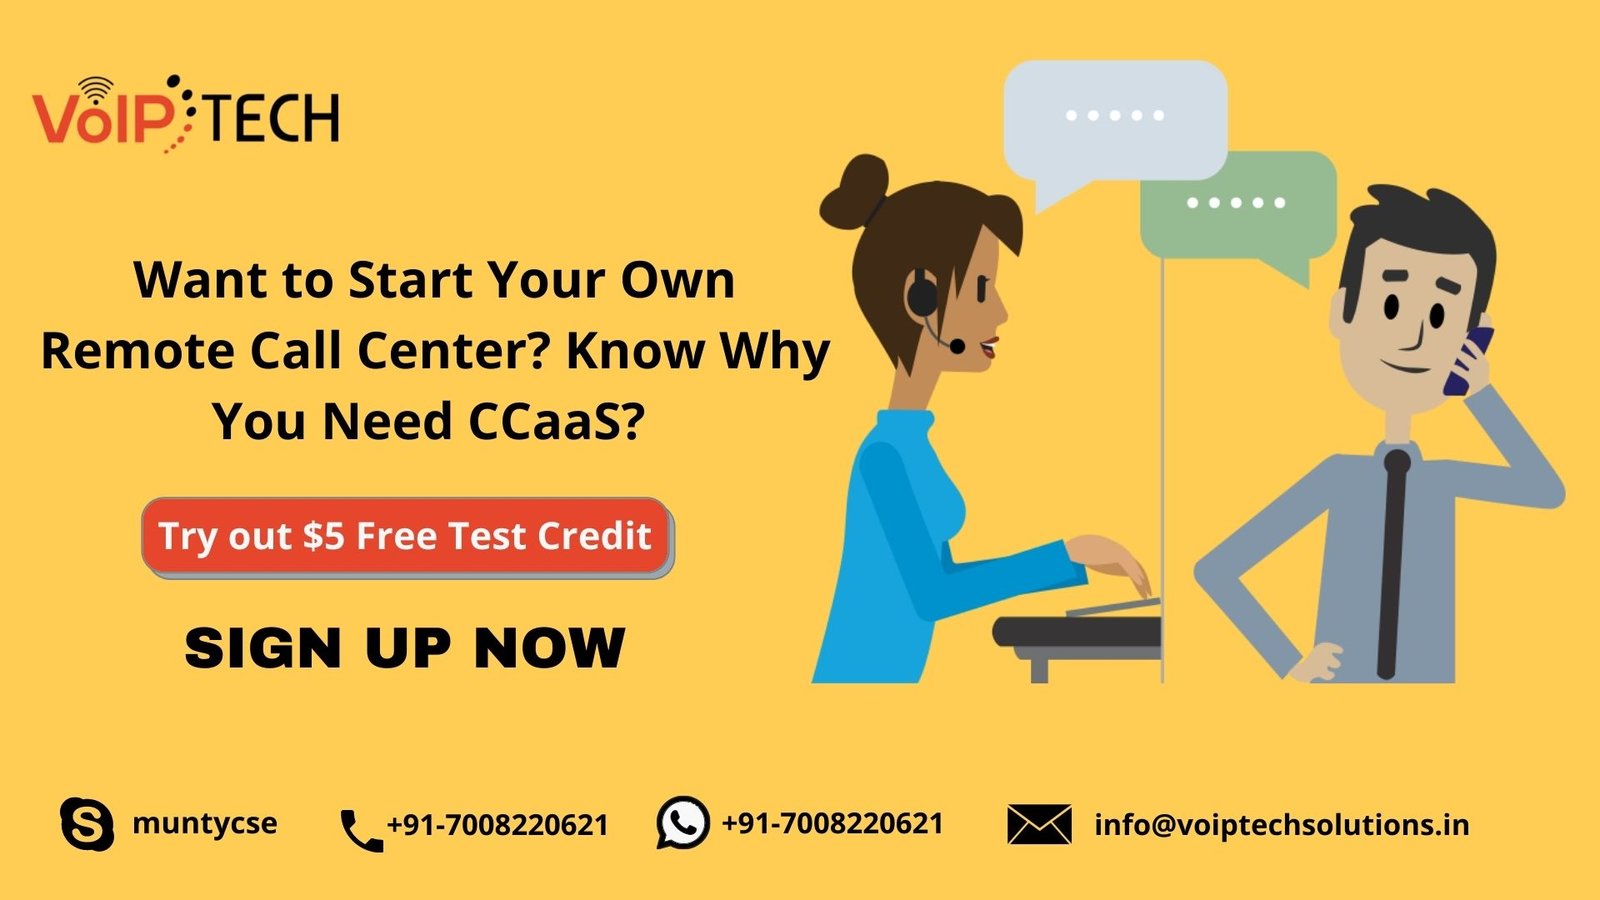 CCaaS, Want to Start Your Own Remote Call Center? Know Why You Need CCaaS? , VoIP tech solutions, vici dialer, virtual number, Voip Providers, voip services in india, best sip provider, business voip providers, VoIP Phone Numbers, voip minutes provider, top voip providers, voip minutes, International VoIP Provider